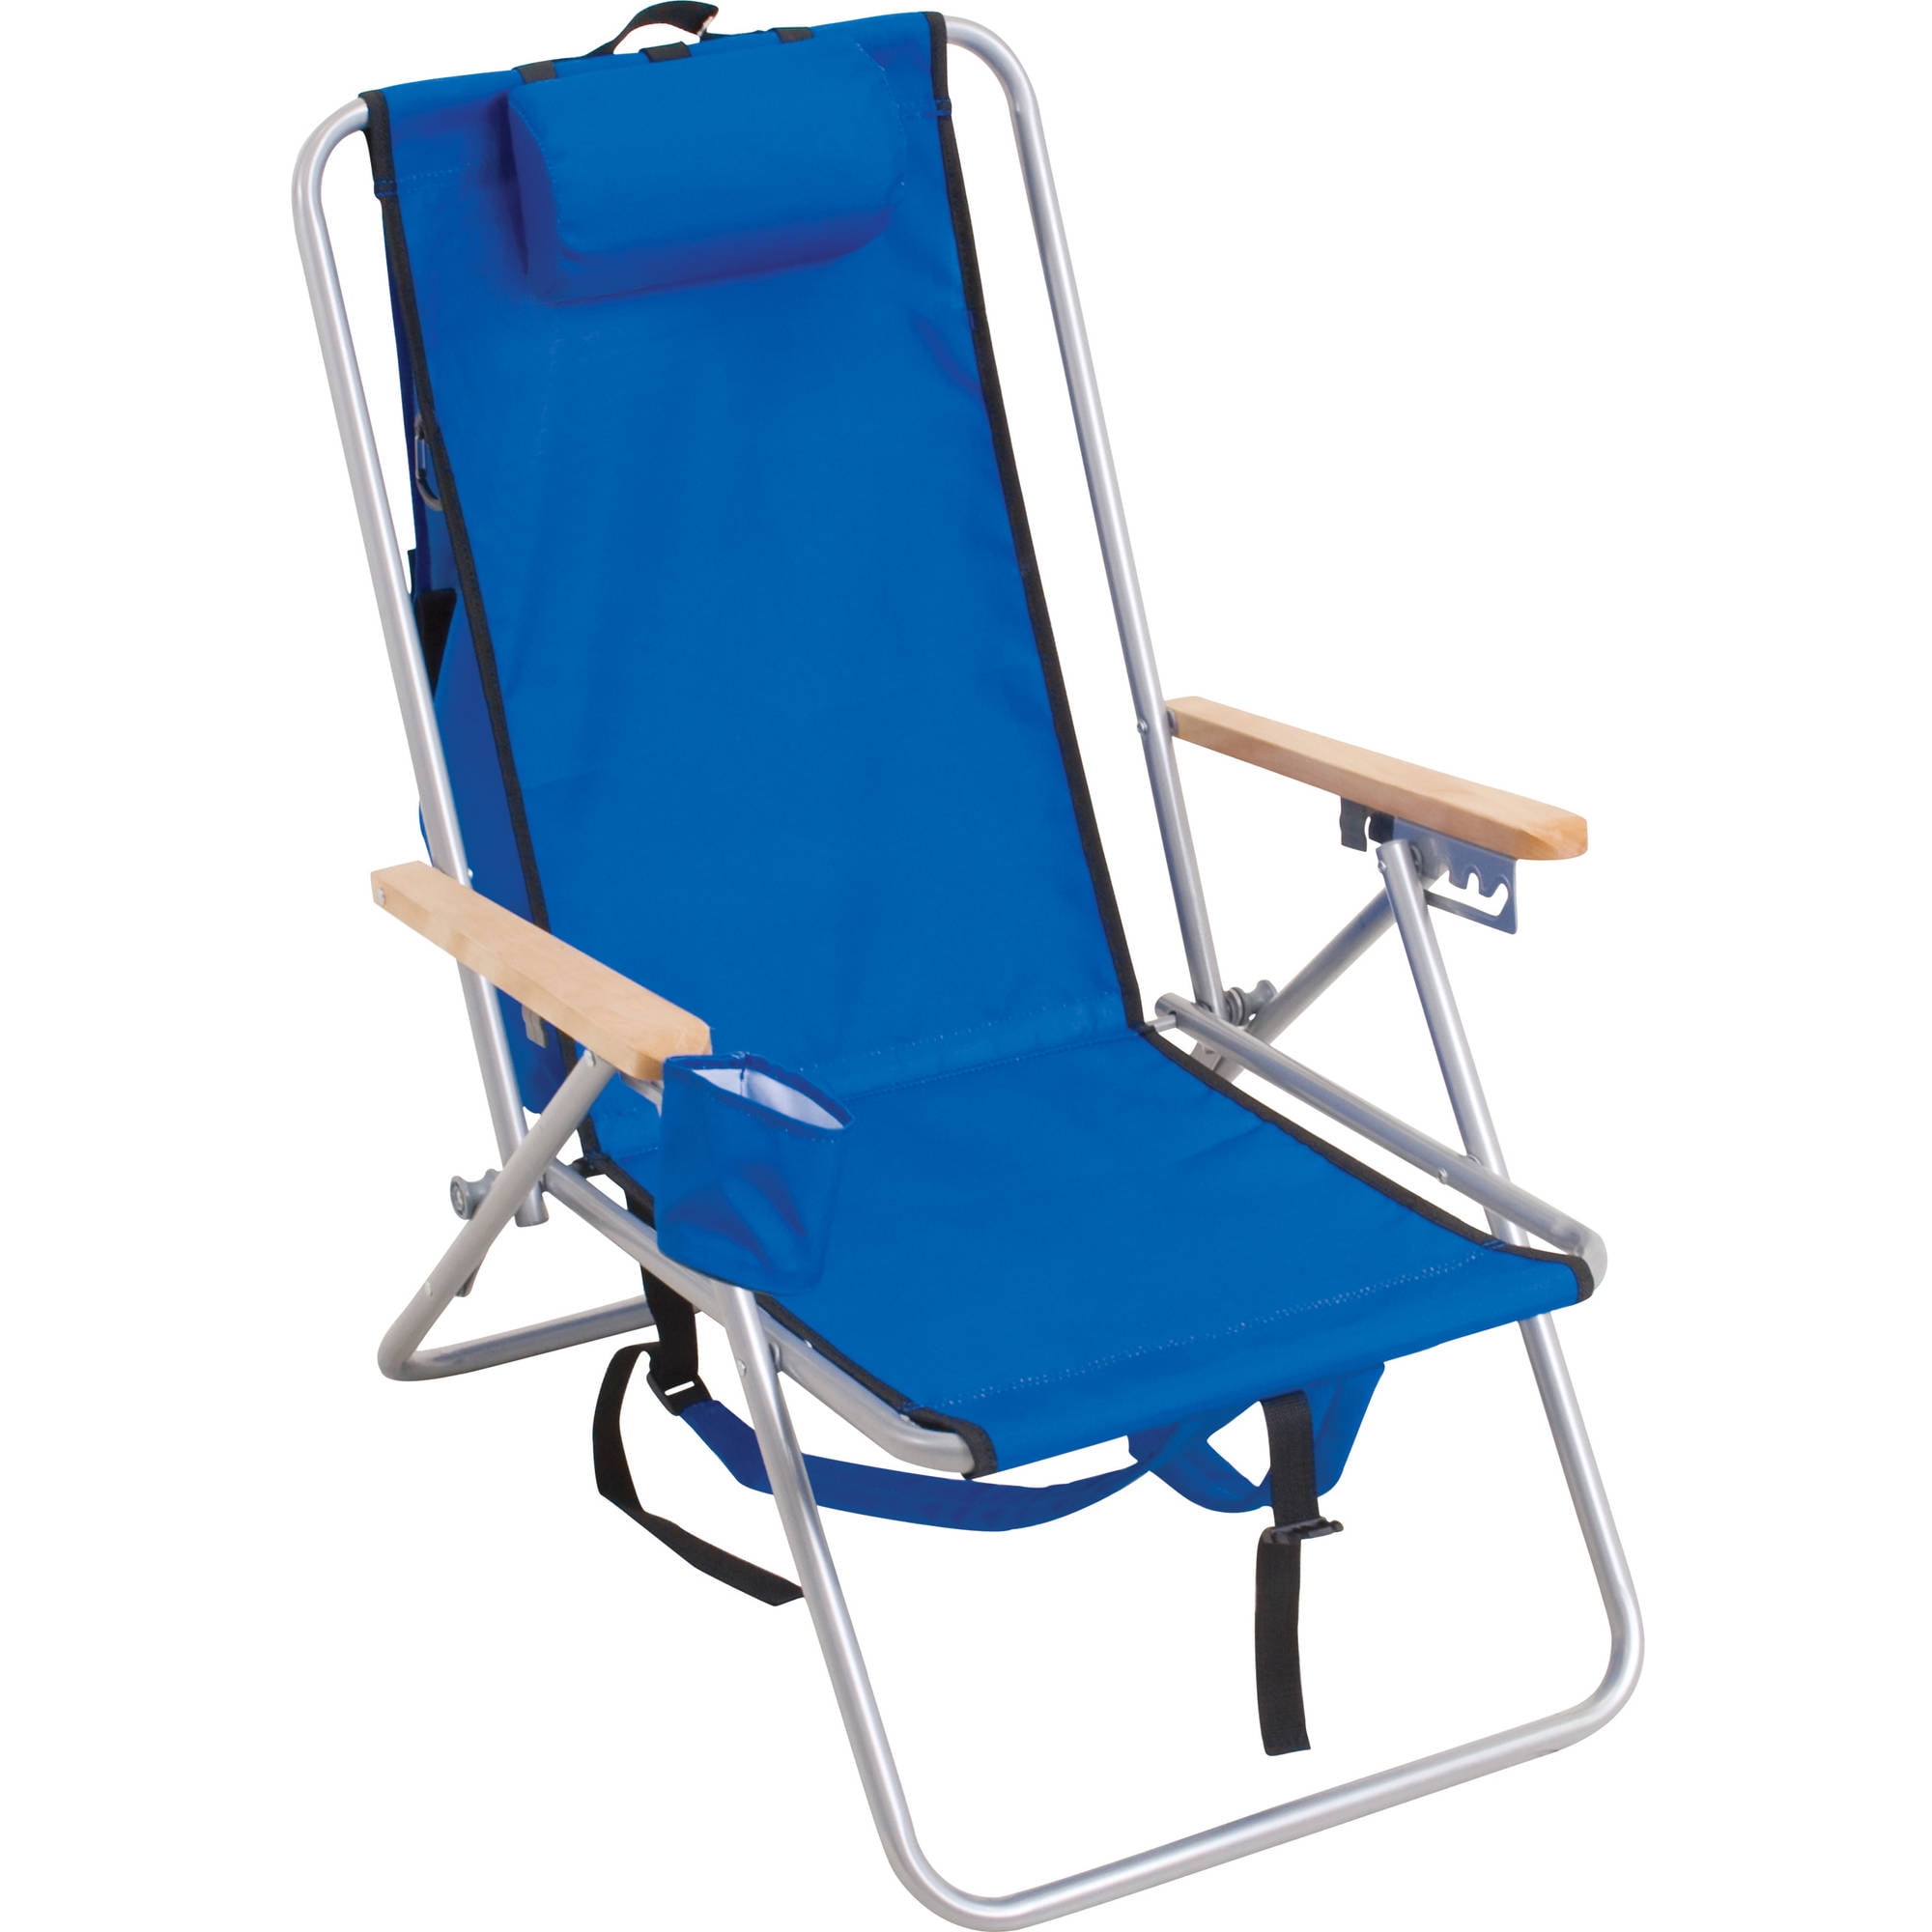 Minimalist How To Close A Rio Beach Chair for Large Space